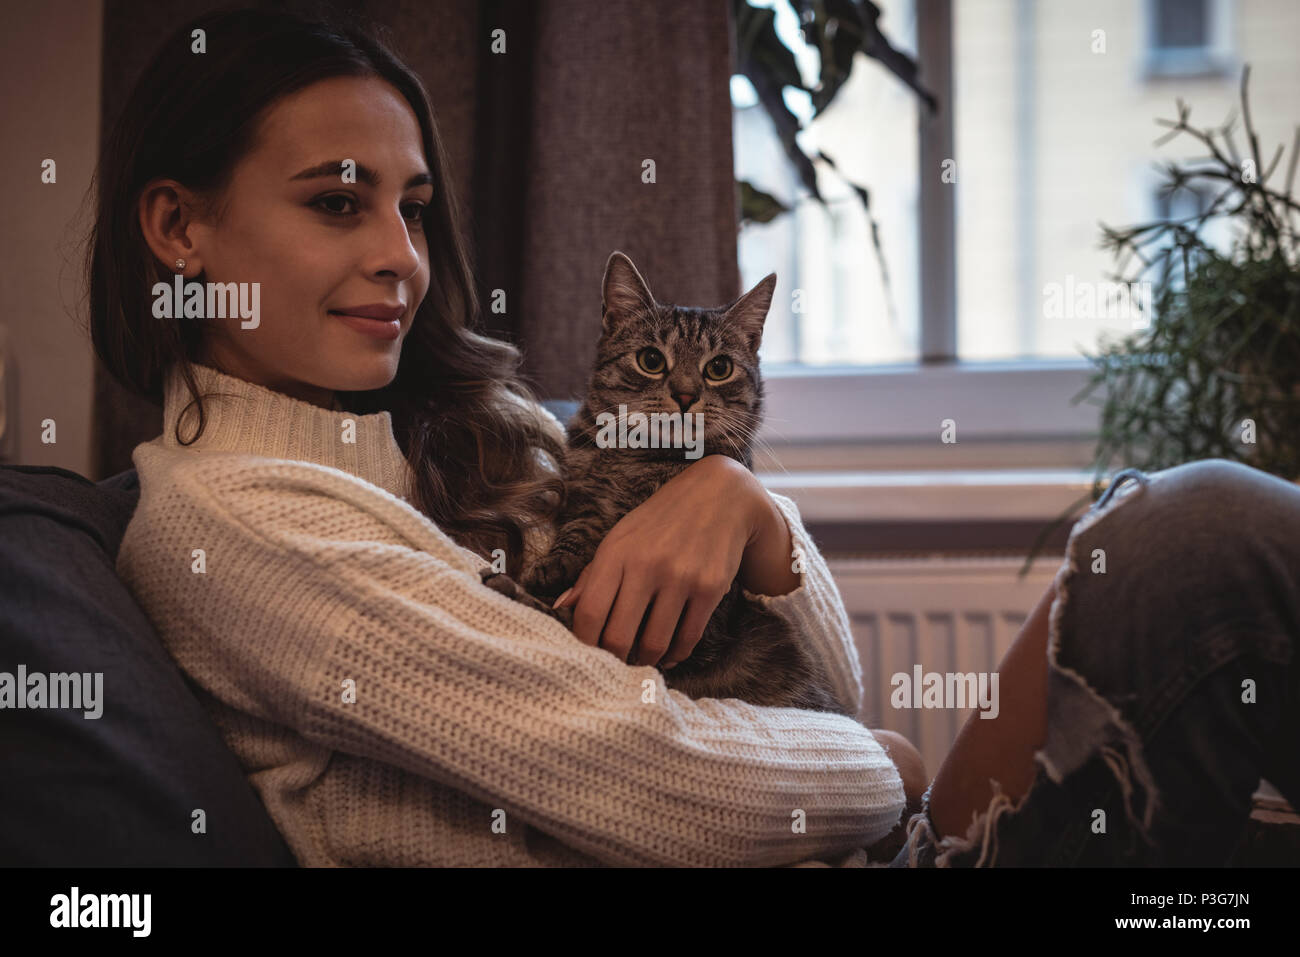 Smiling woman sitting with her pet cat Stock Photo